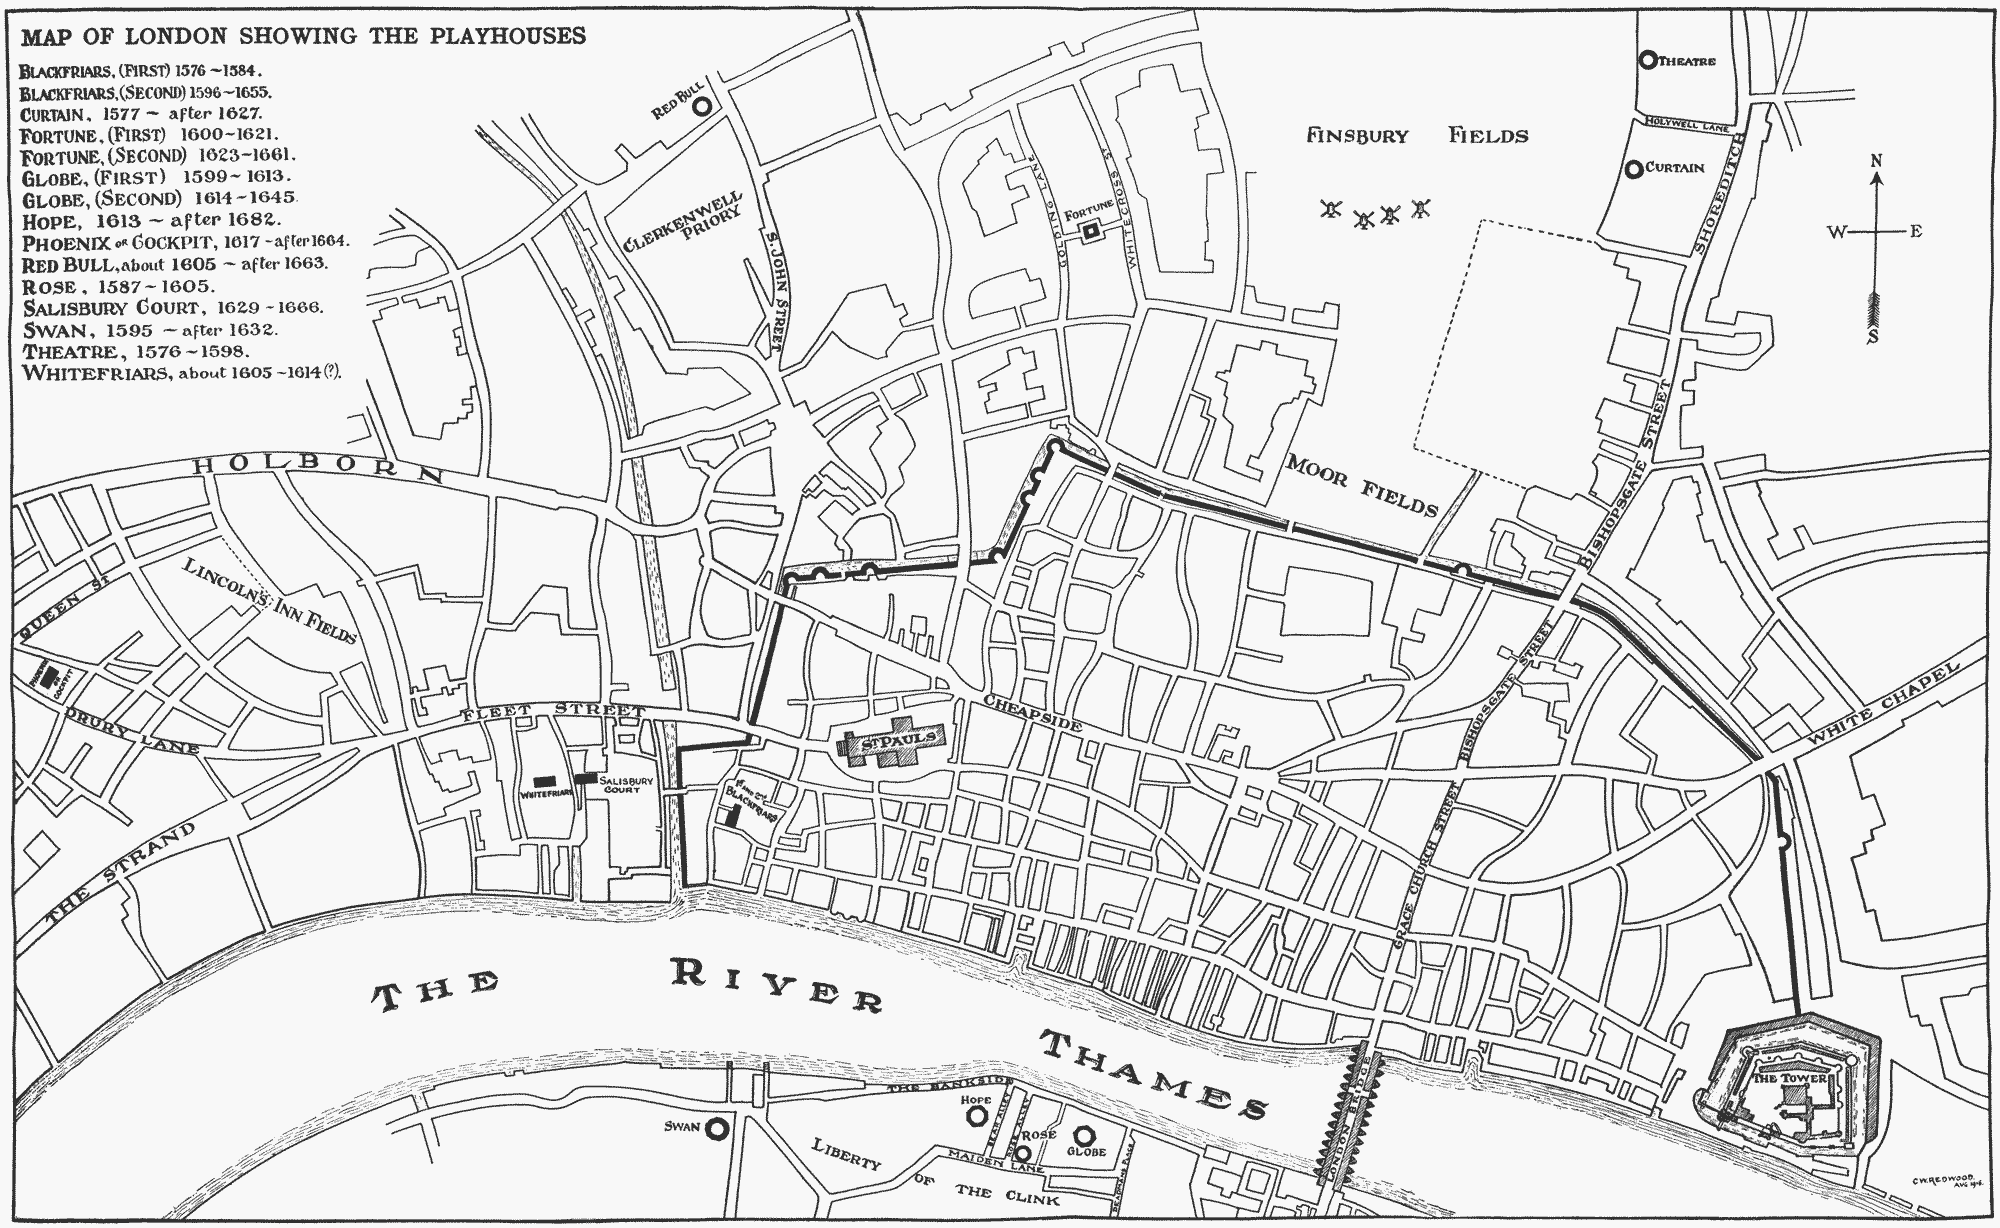 London map showing Shakespearean theatres, in the 16th and 17th centuries